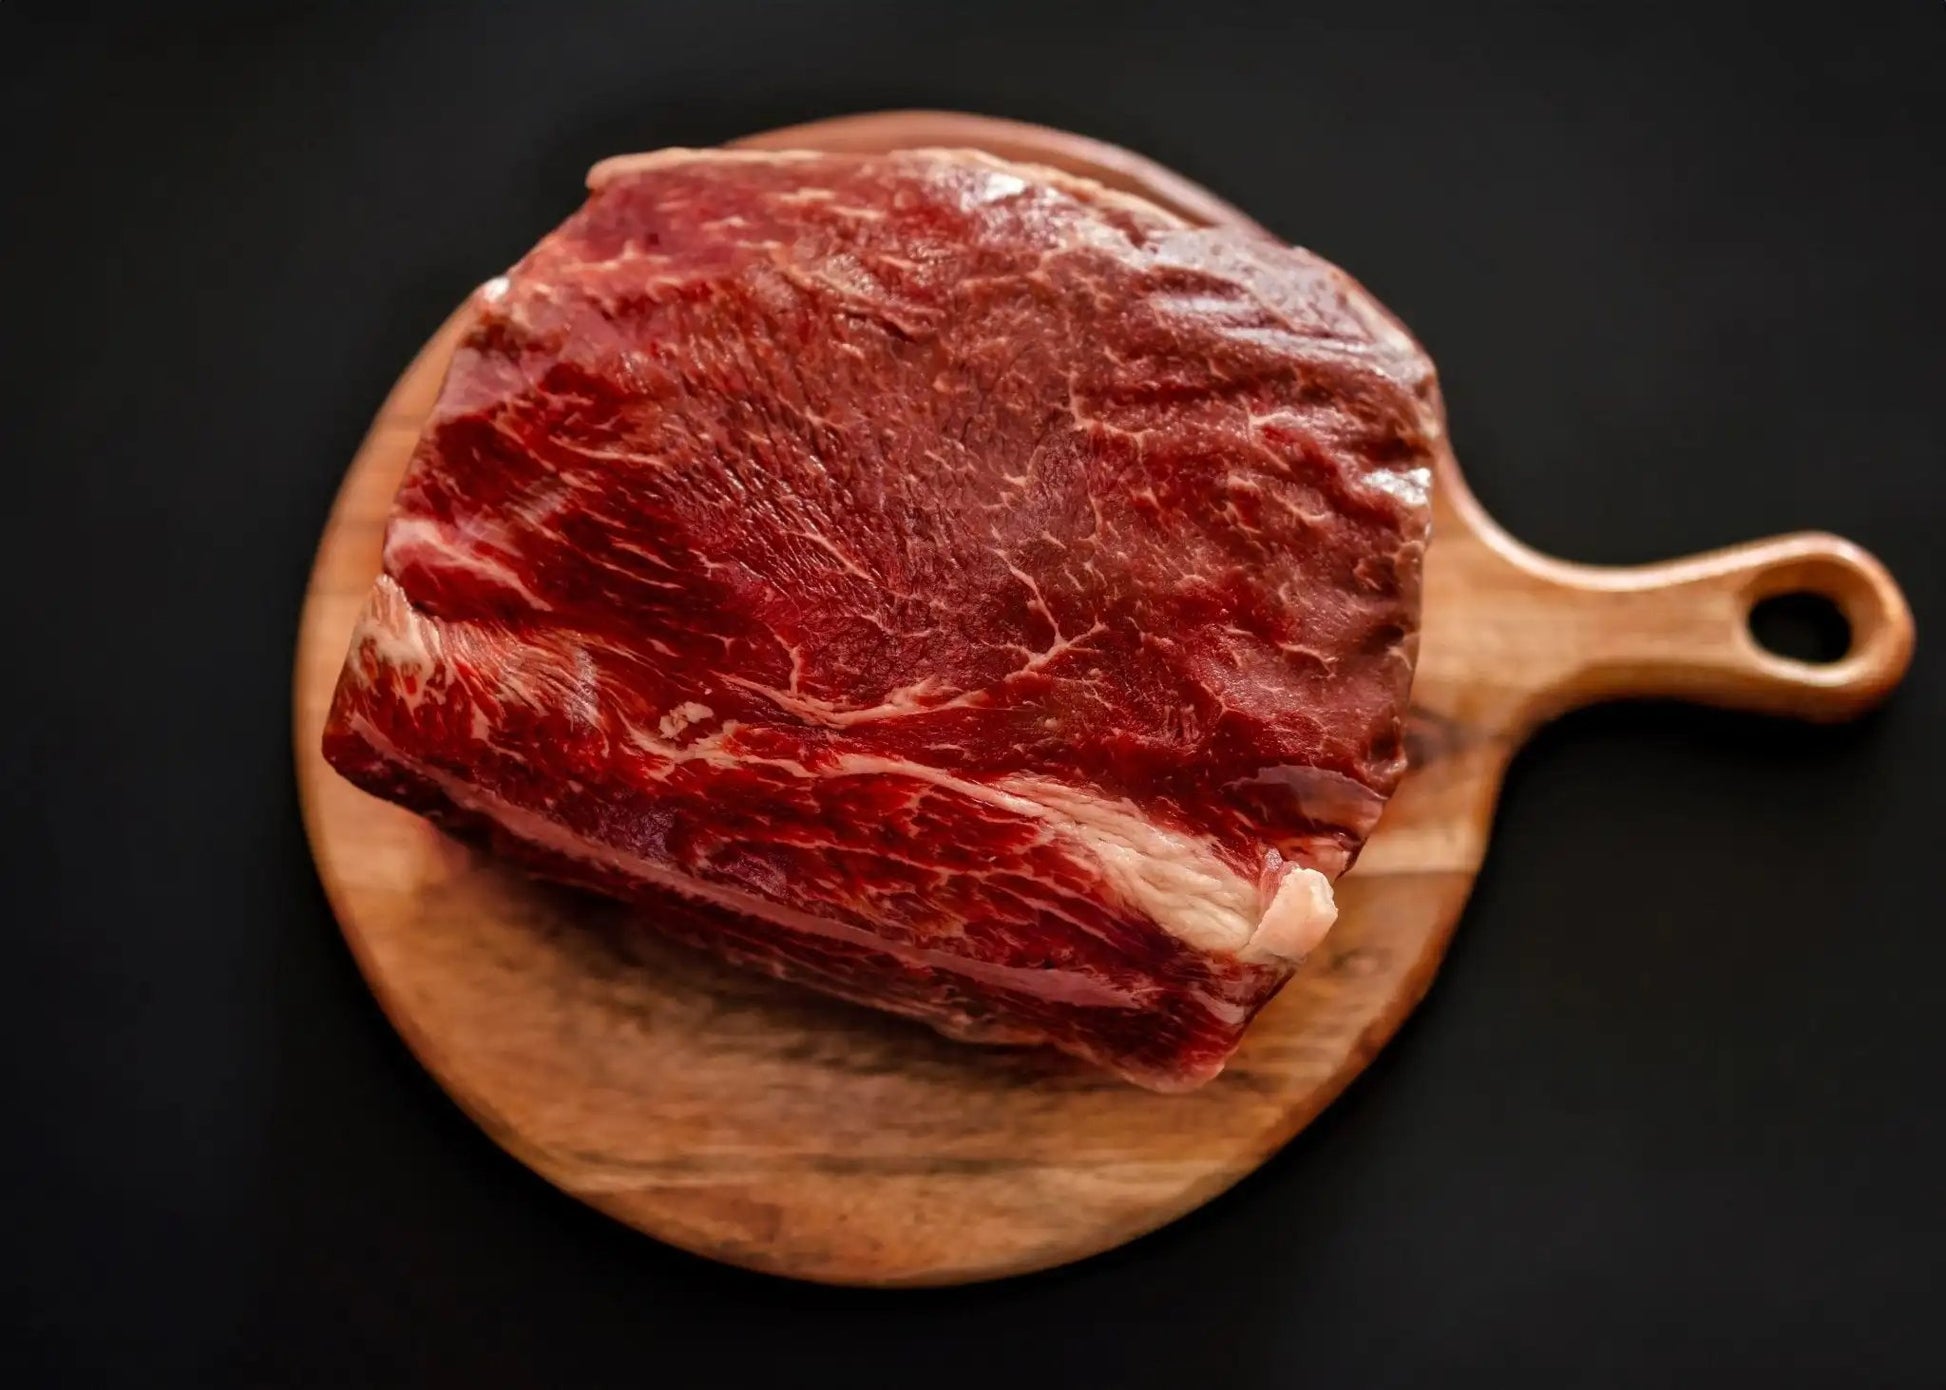 100% All-Natural Grass-Fed Pasture-Raised Wagyu Sirloin Tip RoastElevate your culinary experience with our Grass-Fed Pasture-Raised Wagyu Sirloin Tip Roast. Crafted with precision and care, this roast showcases the exquisite marbl100%The Hufeisen-Ranch (WYO Wagyu)